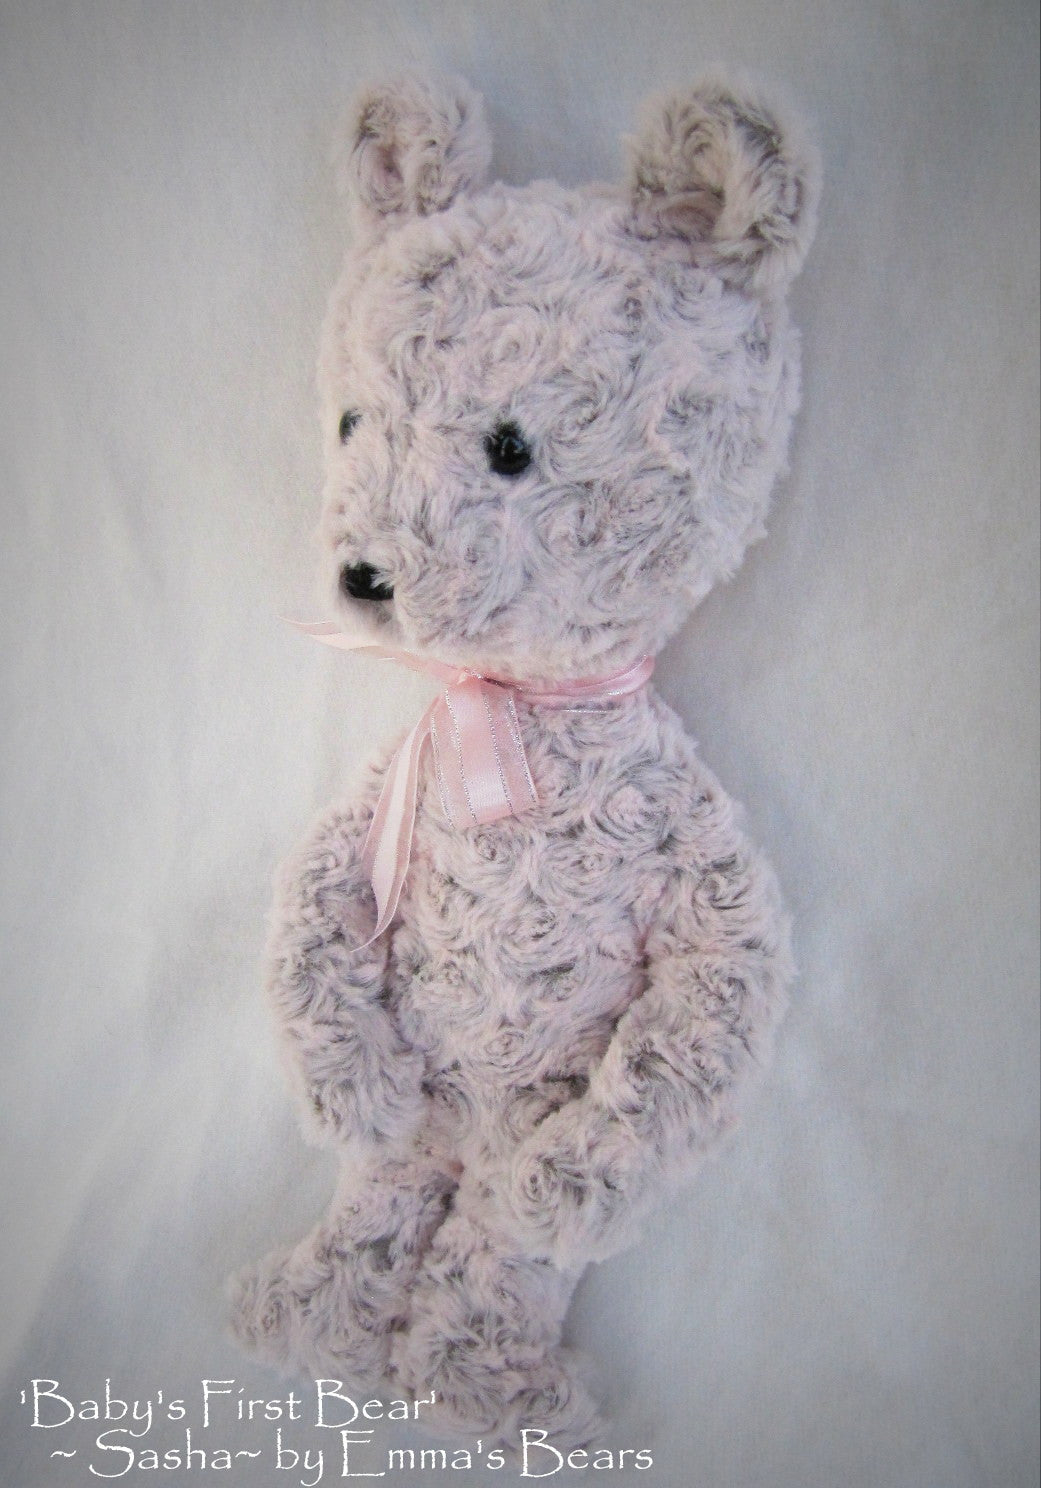 A bear sewing pattern designed for making memory bears, unjointed